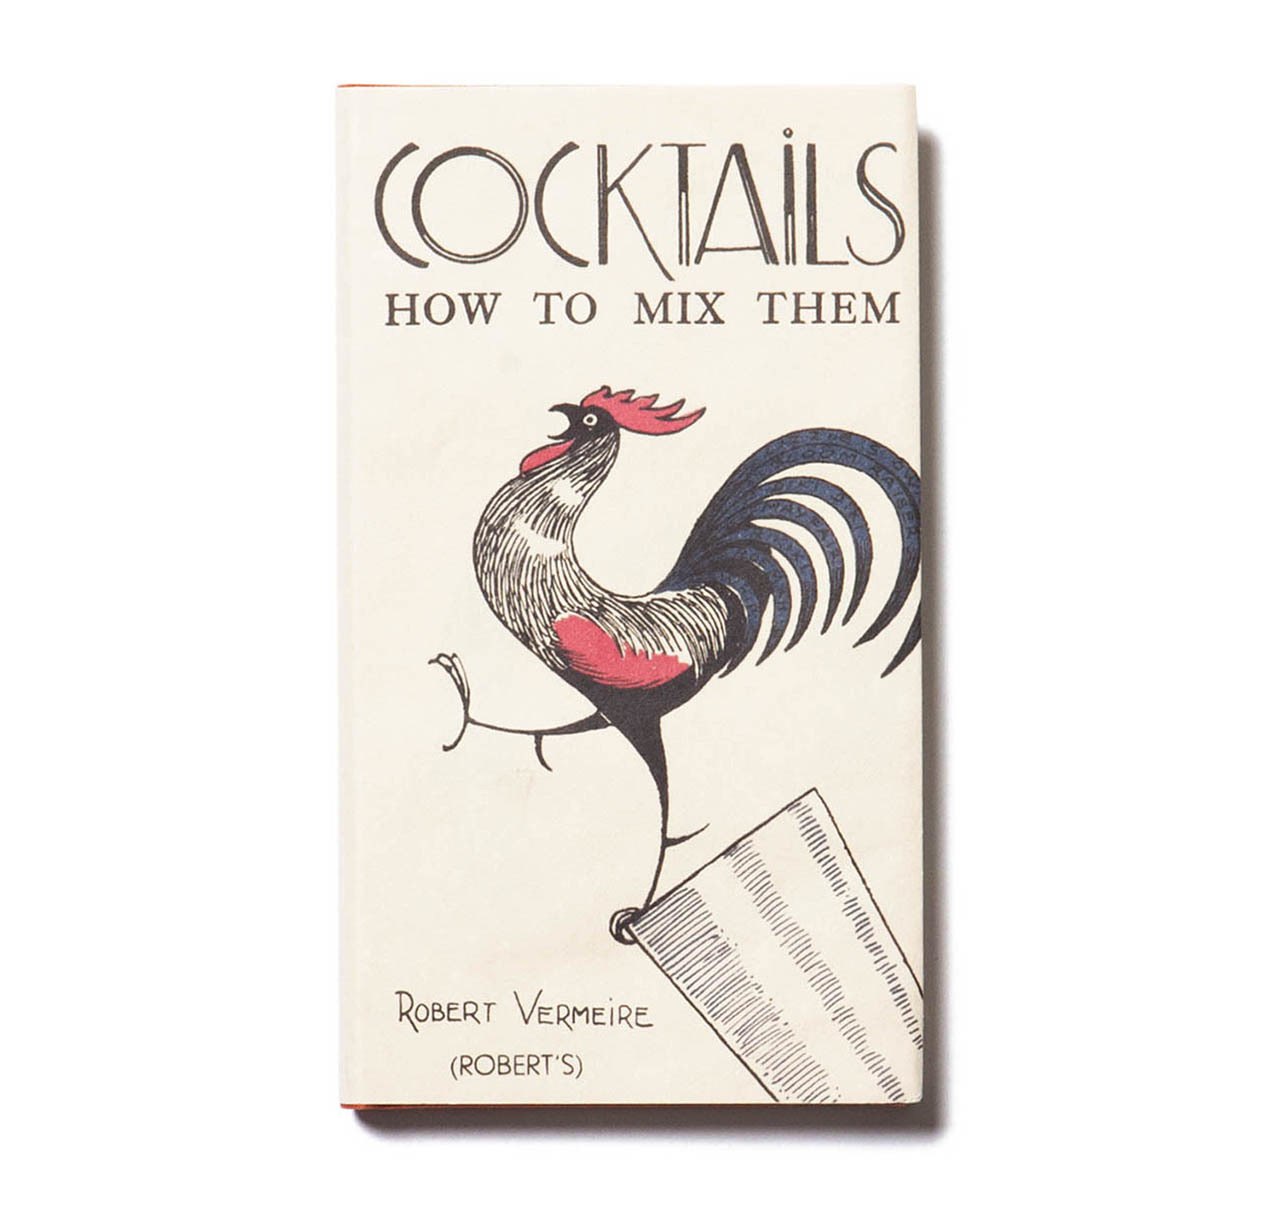 Cocktails: How to Mix Them by Robert Vermeire